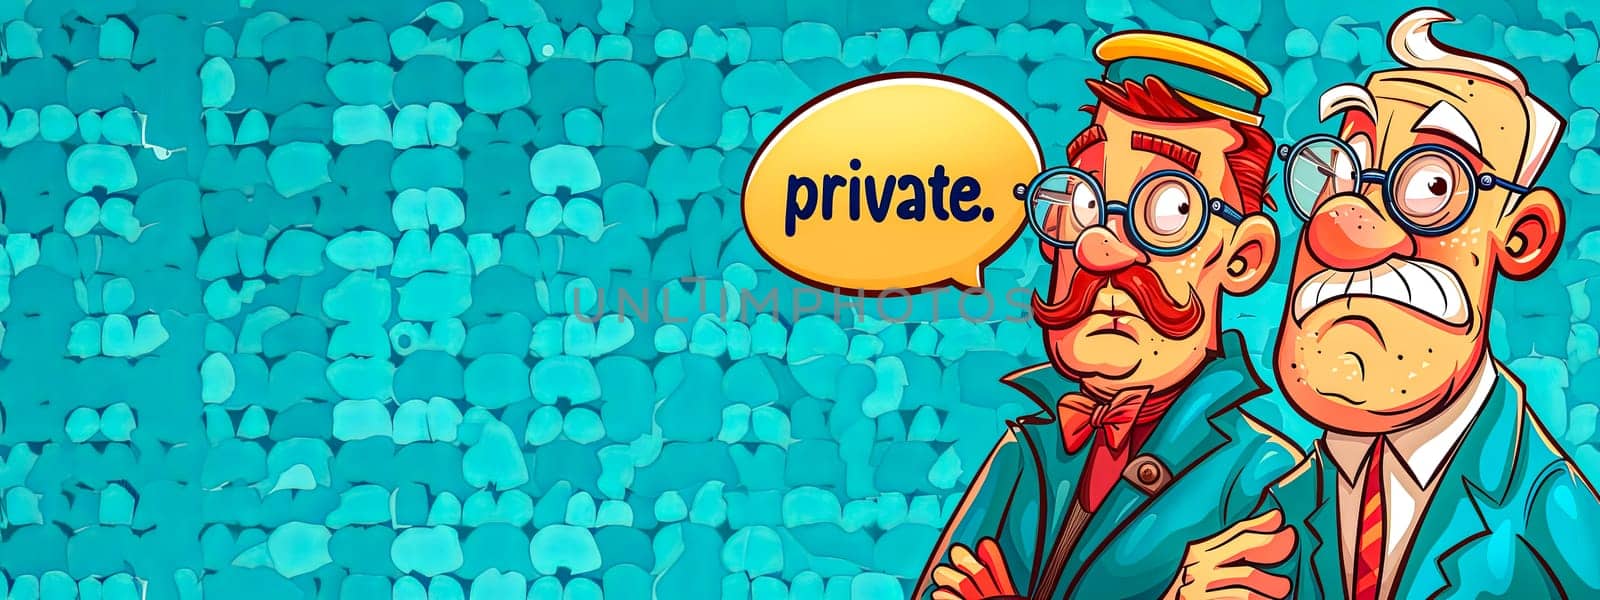 Private discussion concept - cartoon scientists whispering by Edophoto